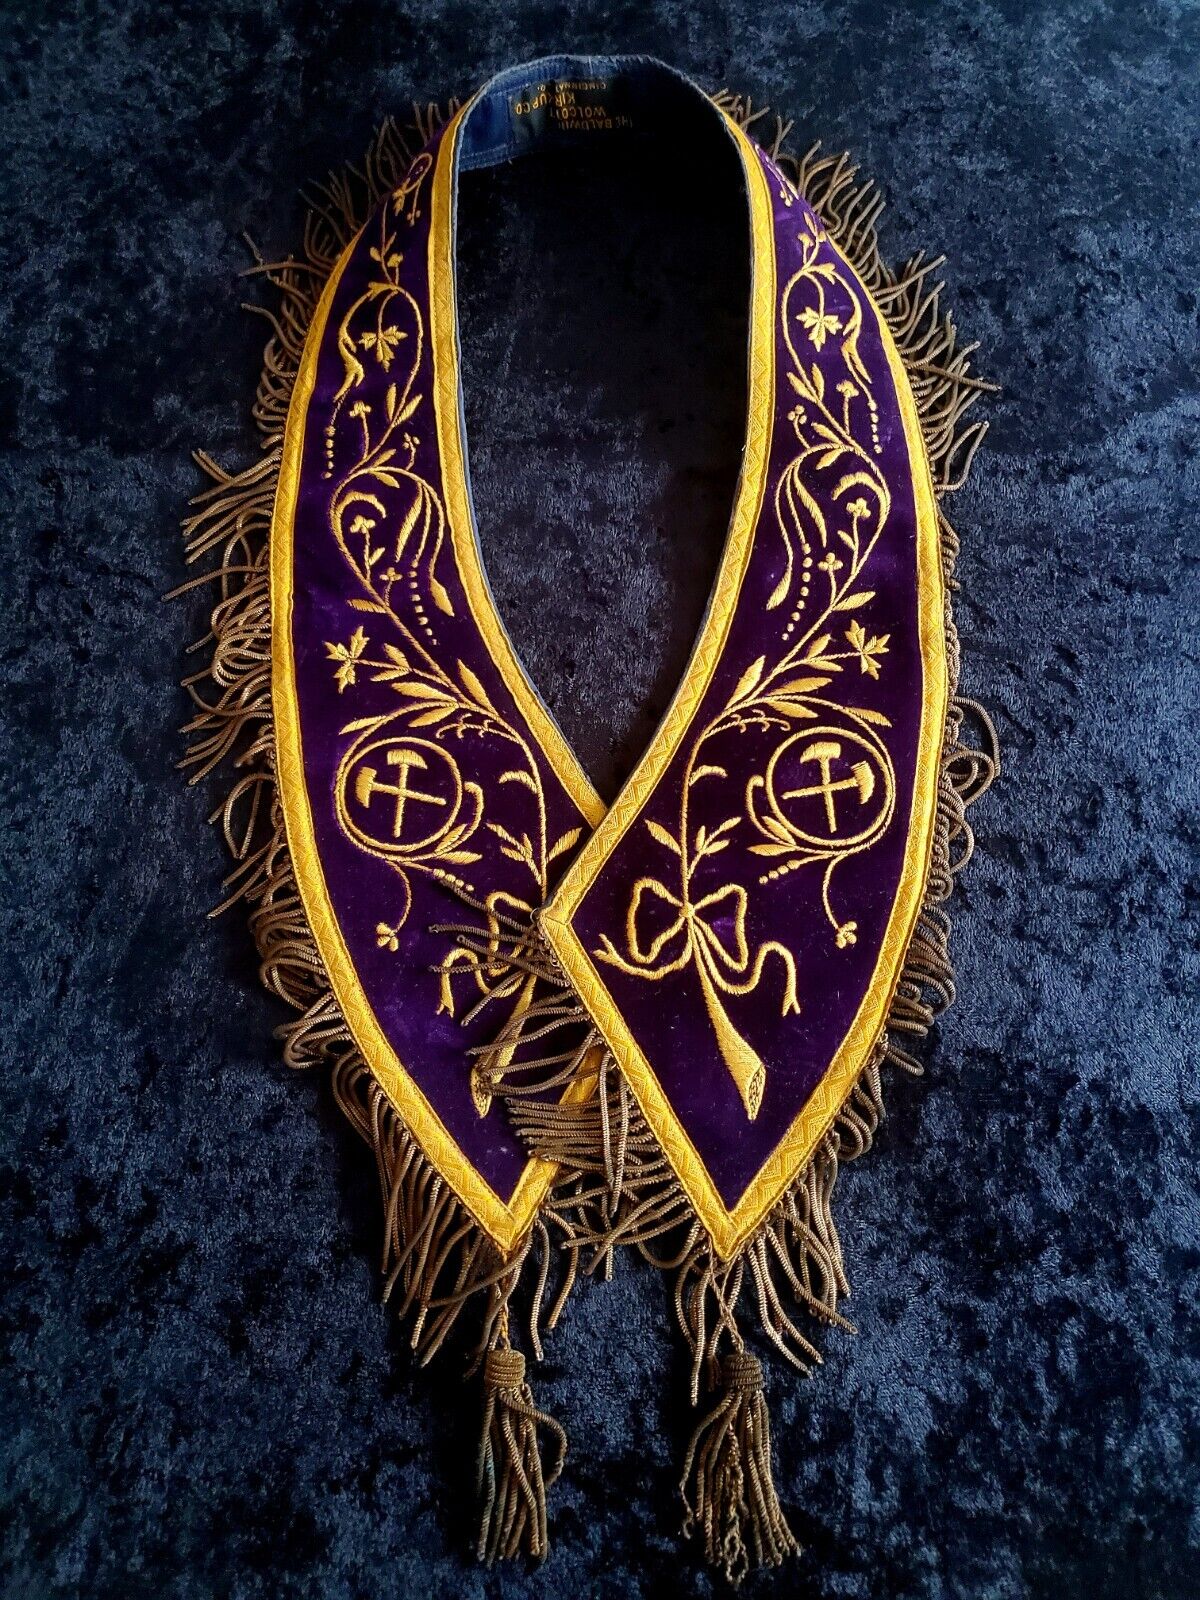 RARE Oddfellows Collar IOOF Purple Gold w Metal Tassels Embroidered Ceremonial